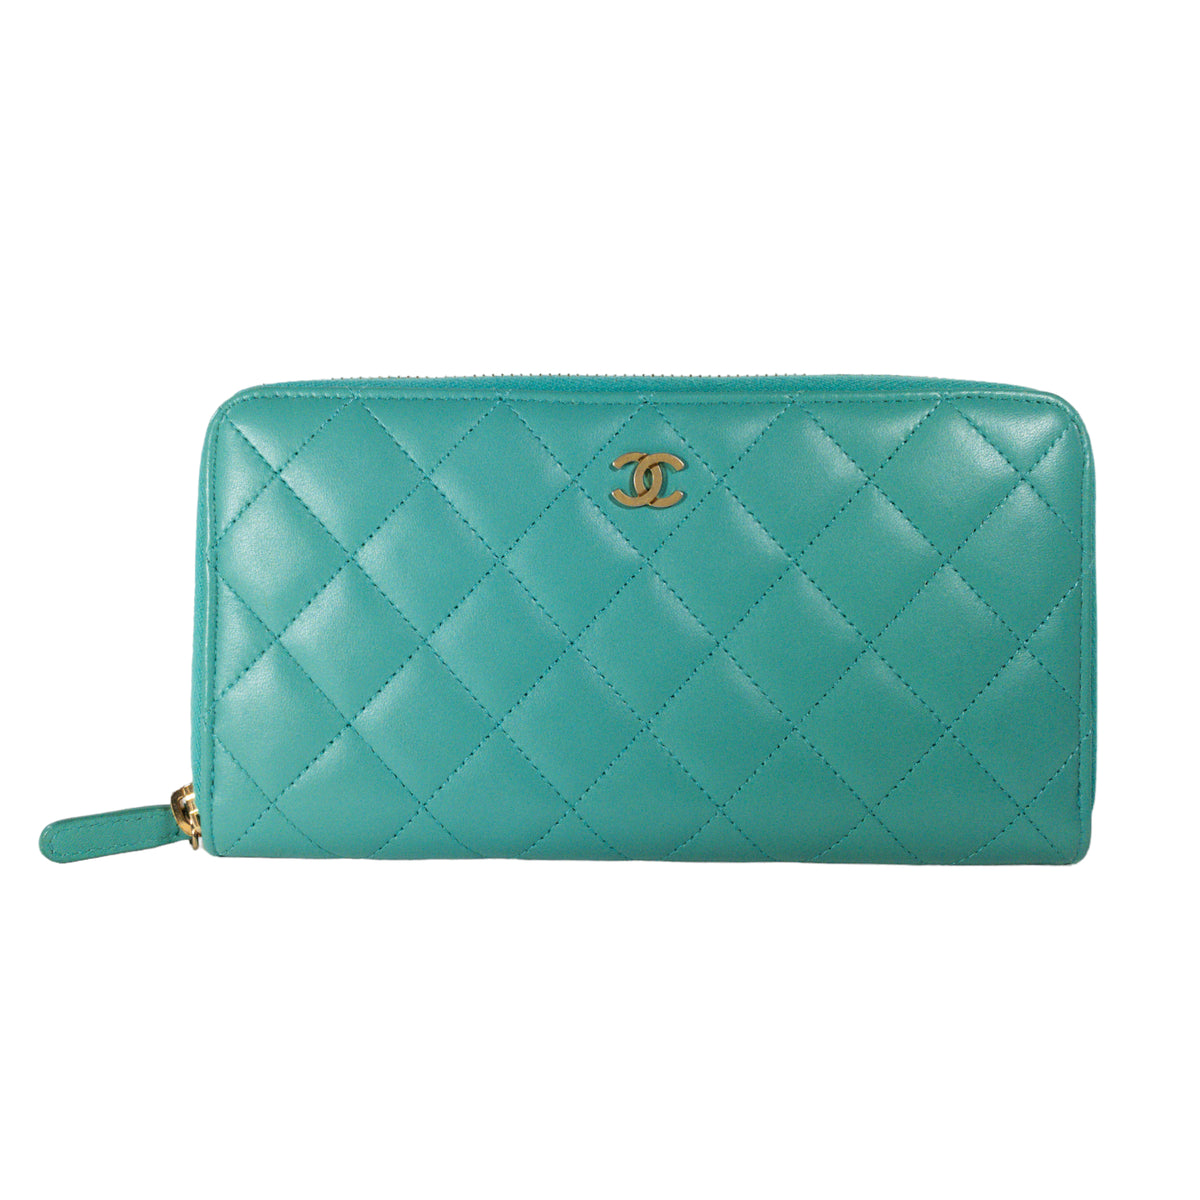 $1200 Chanel Classic Turquoise Blue Patent Quilted Leather Zippy  Continental Wallet SHW - Lust4Labels